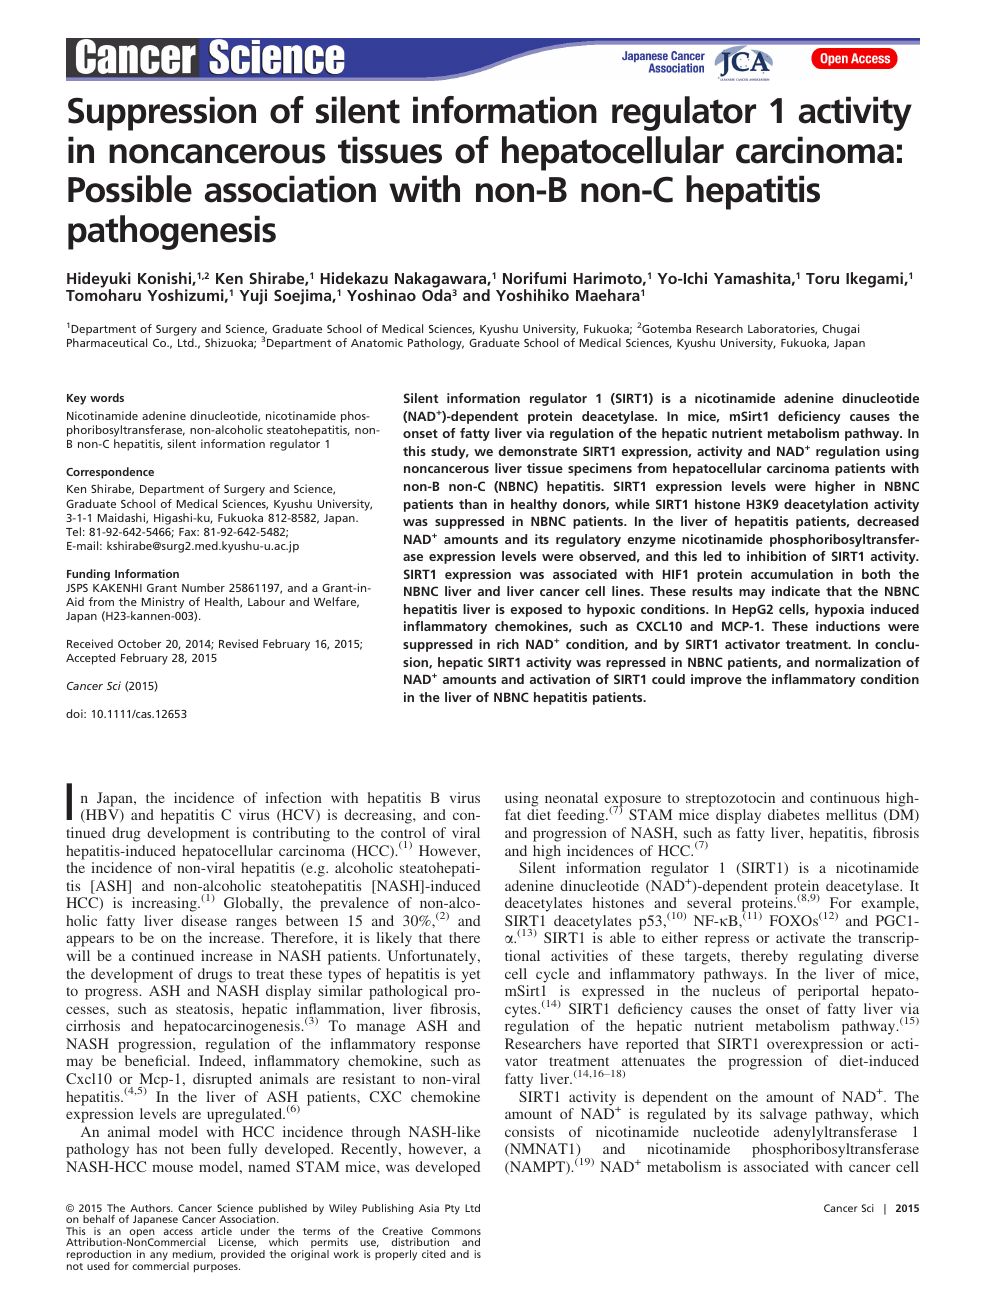 Suppression Of Silent Information Regulator 1 Activity In Noncancerous Tissues Of Hepatocellular Carcinoma Possible Association With Non B Non C Hepatitis Pathogenesis Topic Of Research Paper In Clinical Medicine Download Scholarly Article Pdf